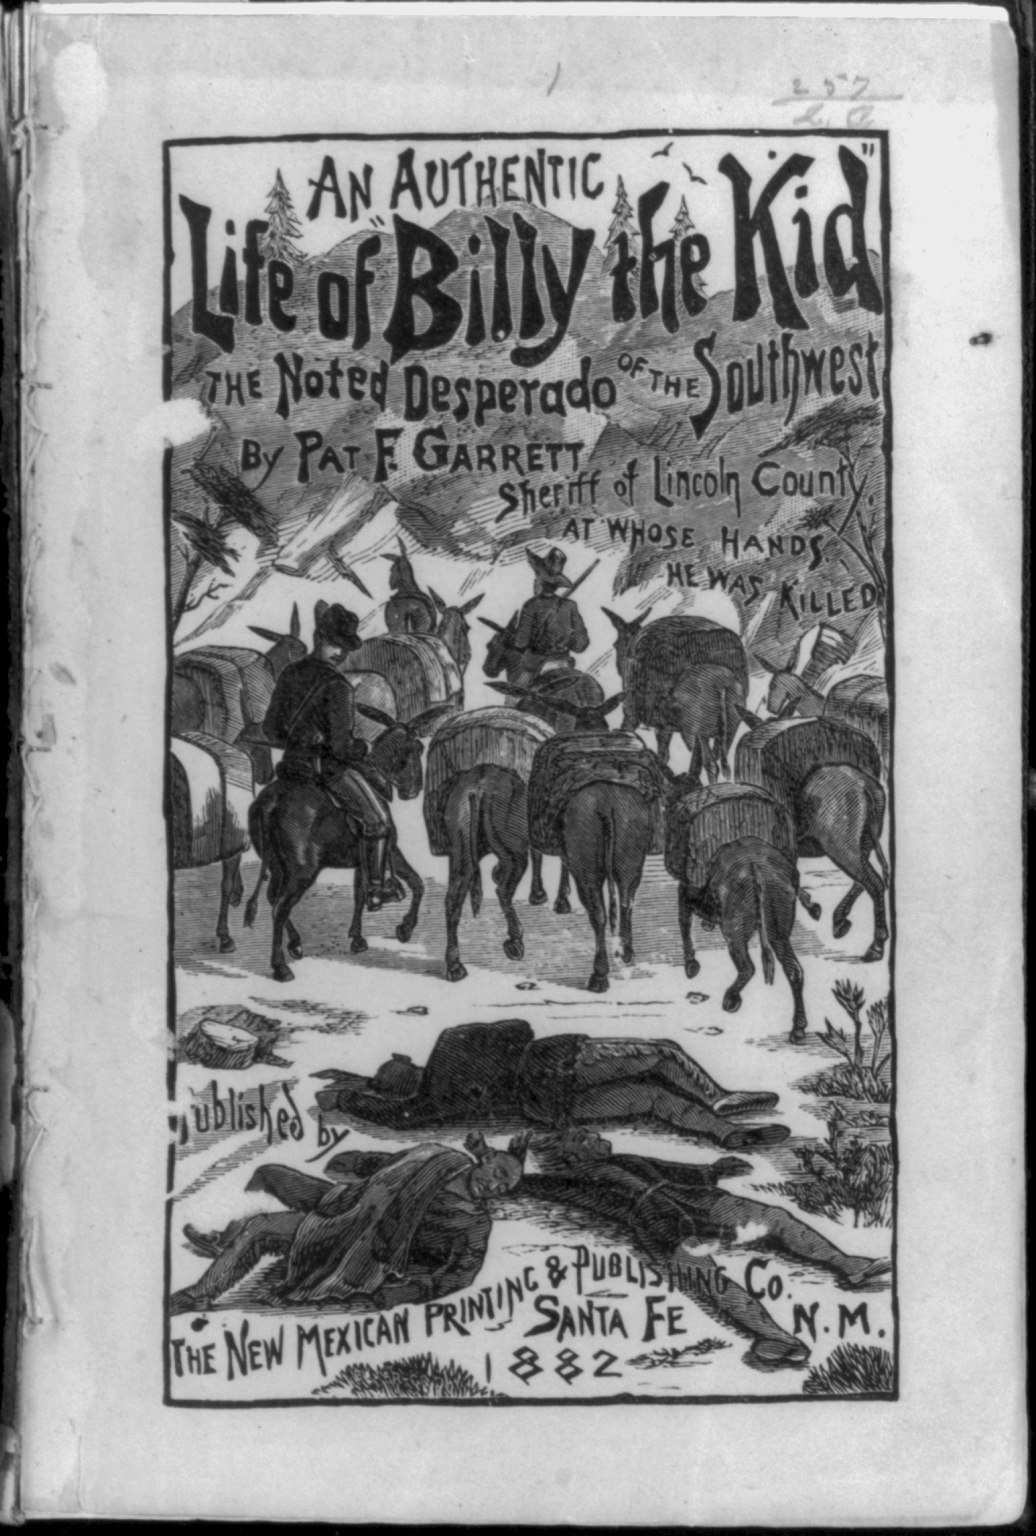 https://upload.wikimedia.org/wikipedia/commons/e/eb/Cover_of_Pat_F._Garrett%2C_An_Authentic_Life_of_Billy_the_Kid%2C_the_Noted_Desperado_of_the_Southwest%2C_illustrated_with_2_men_with_horses_riding_away_from_dead_bodies_lying_on_ground_LCCN2002716111.jpg